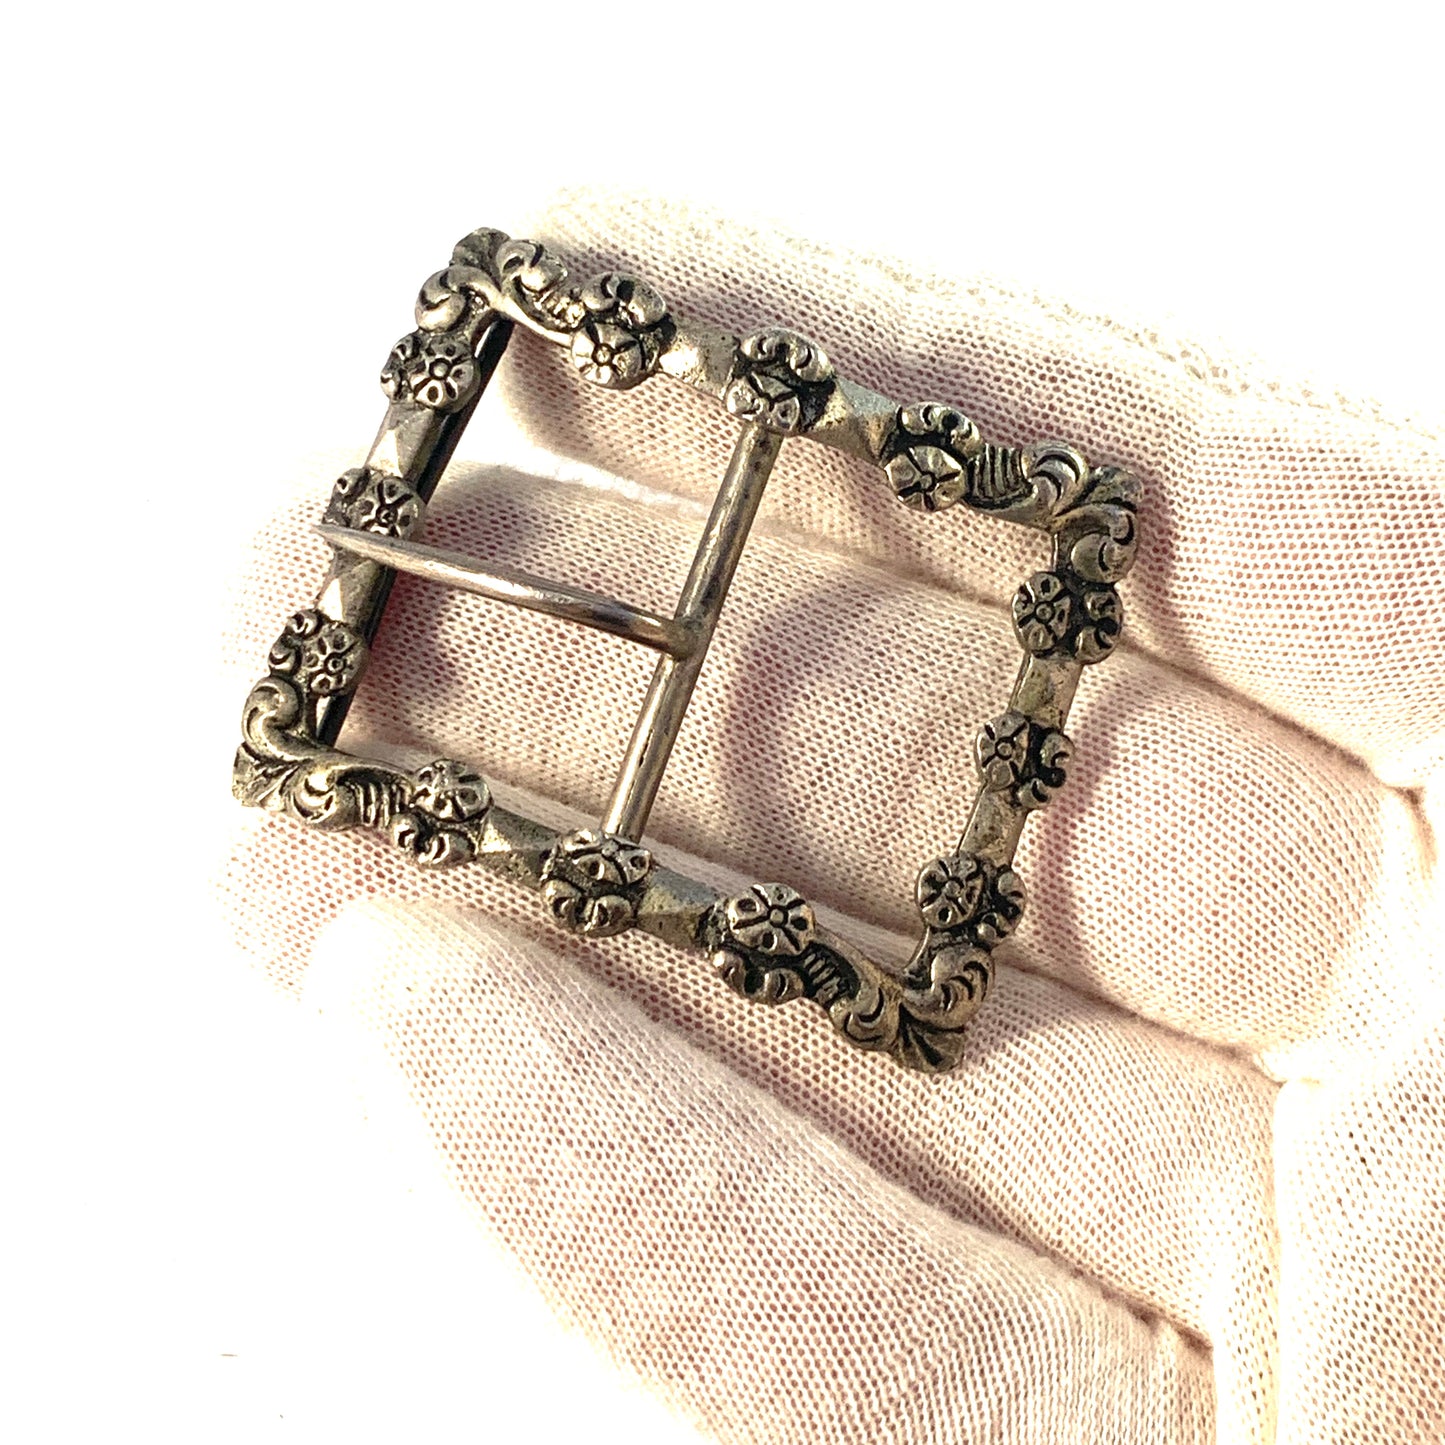 Clement Berg, Norway c year 1900. Solid 830 Silver Belt Buckle.